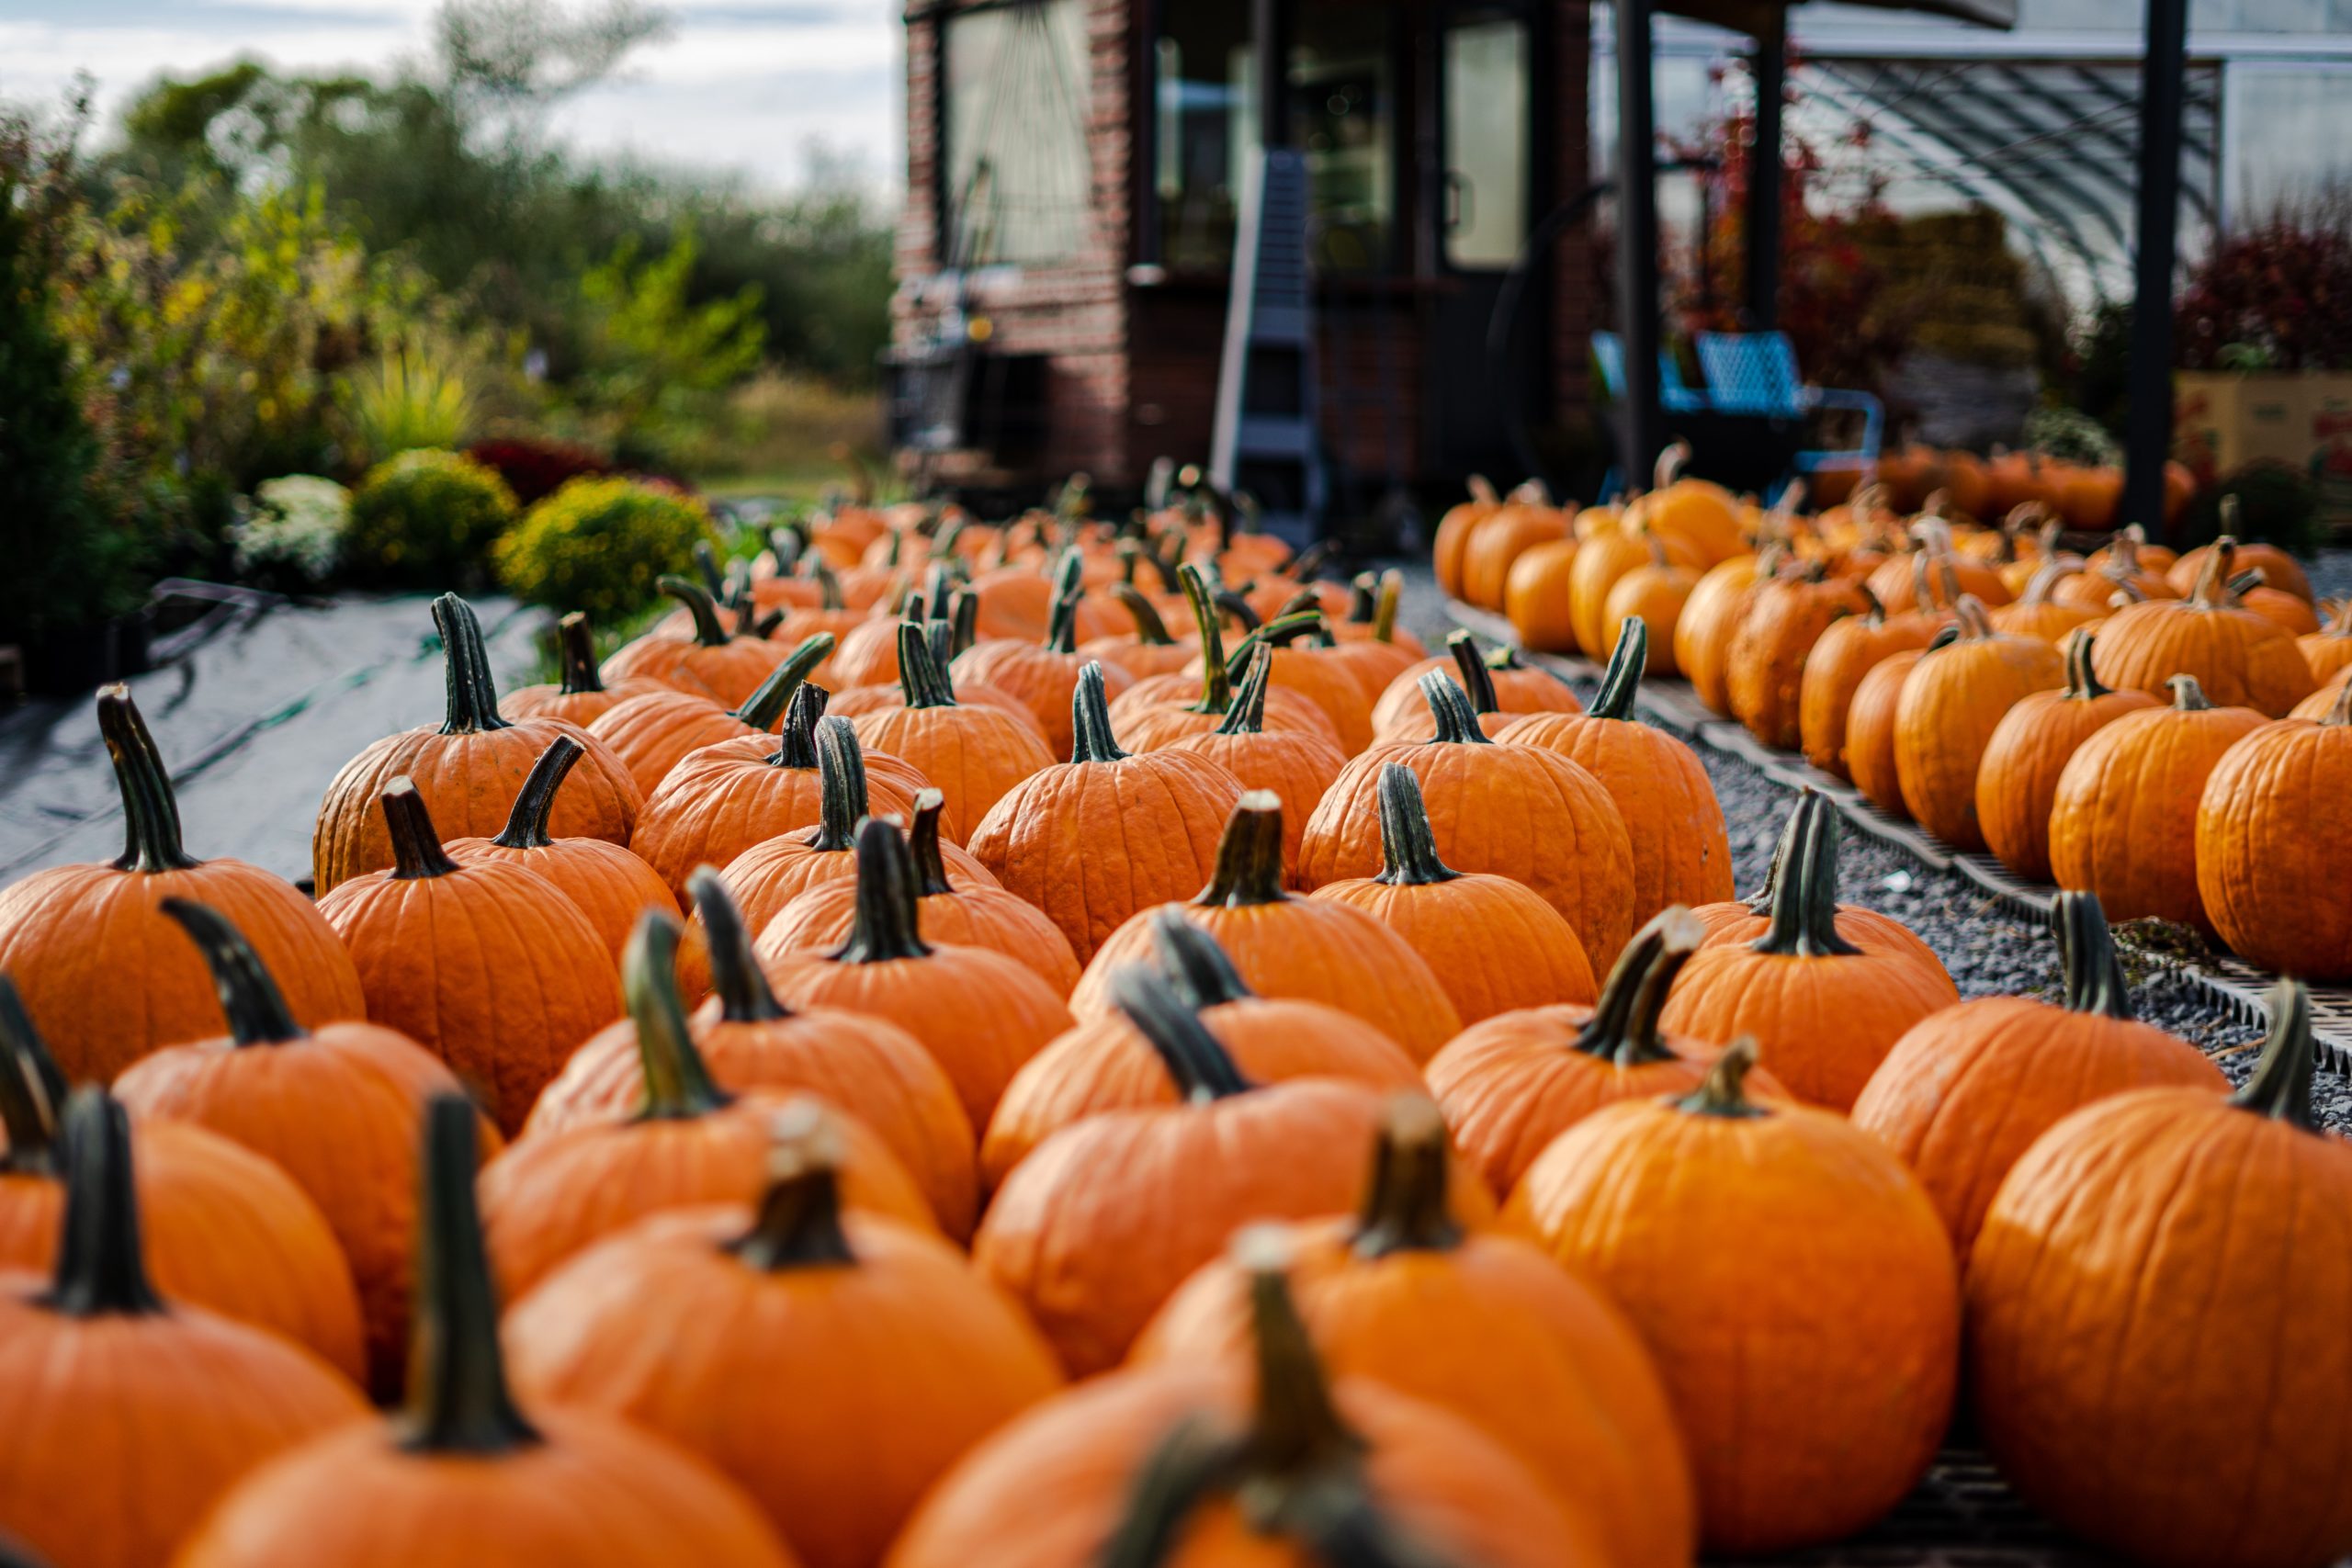 Local Fall Festivities to Check Out This Season! - Wellness360 Magazine